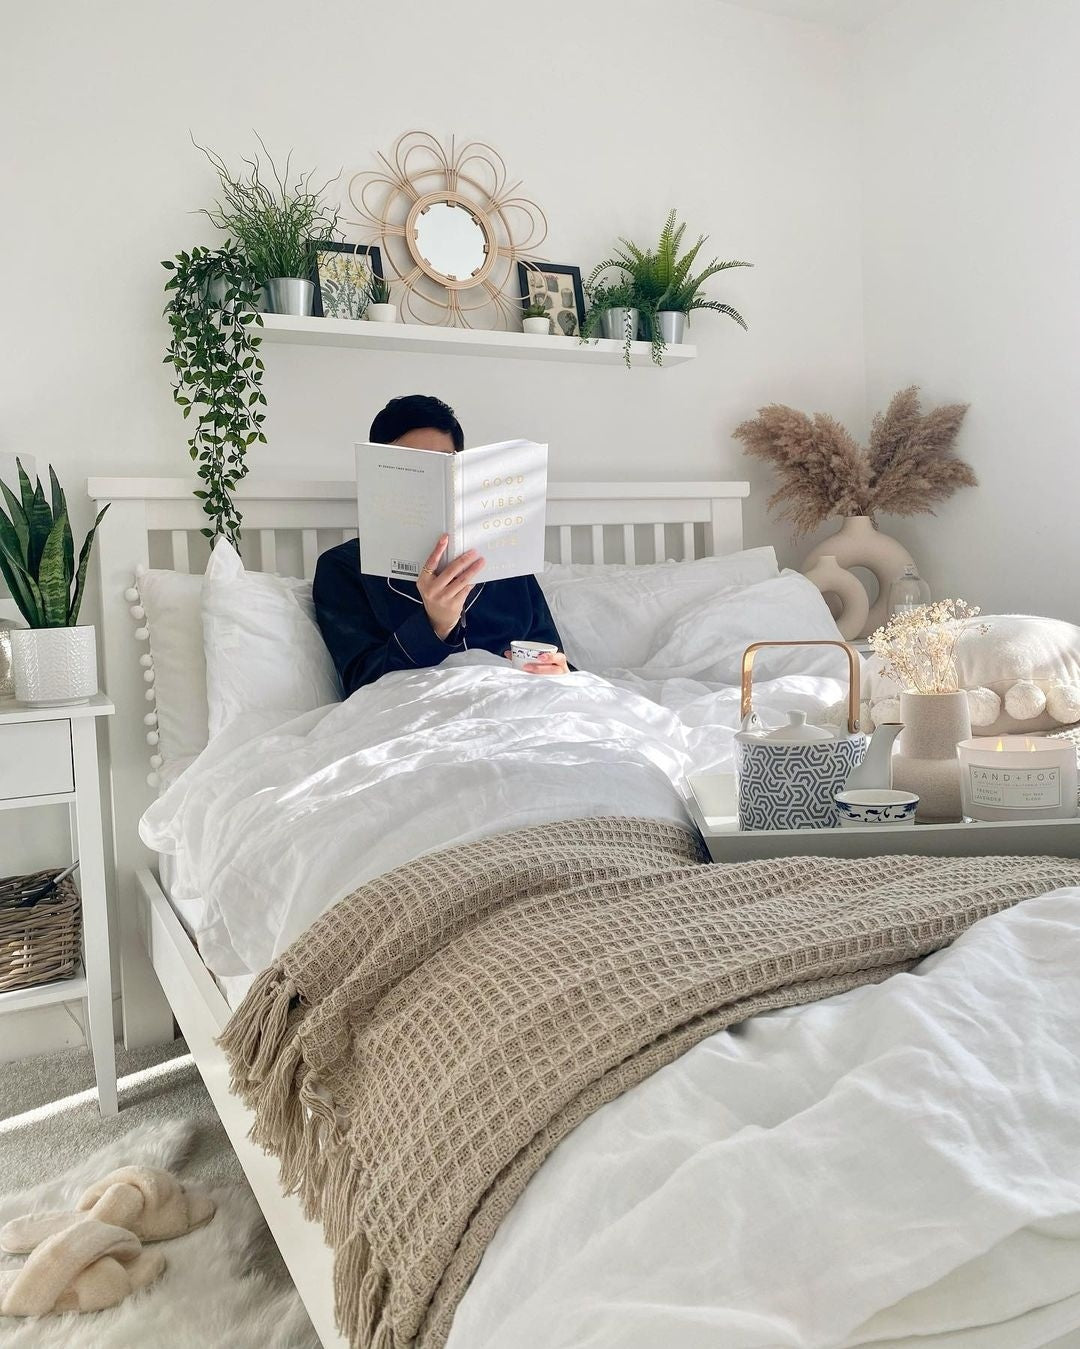 How to Make a Cozy Bed: 7 Tips for a Dreamy Setup